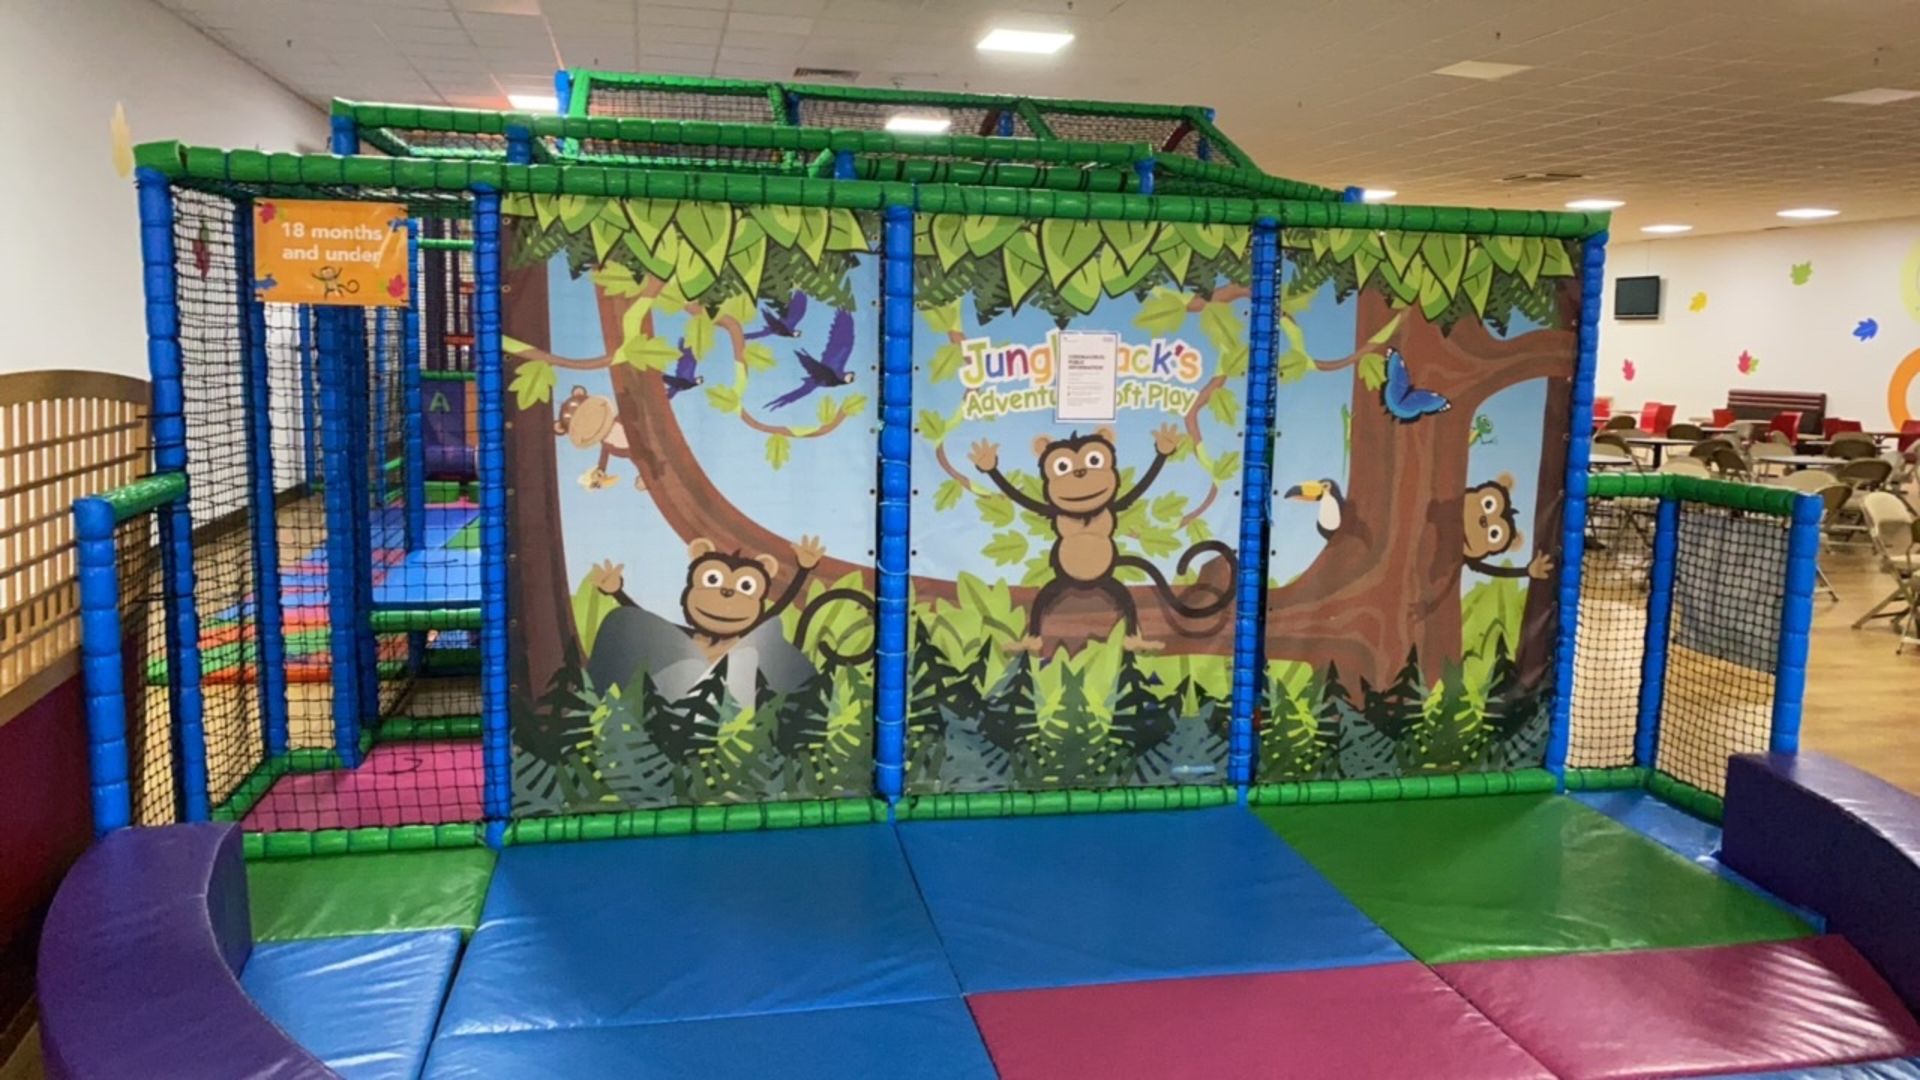 Toddlers play area - Image 5 of 9